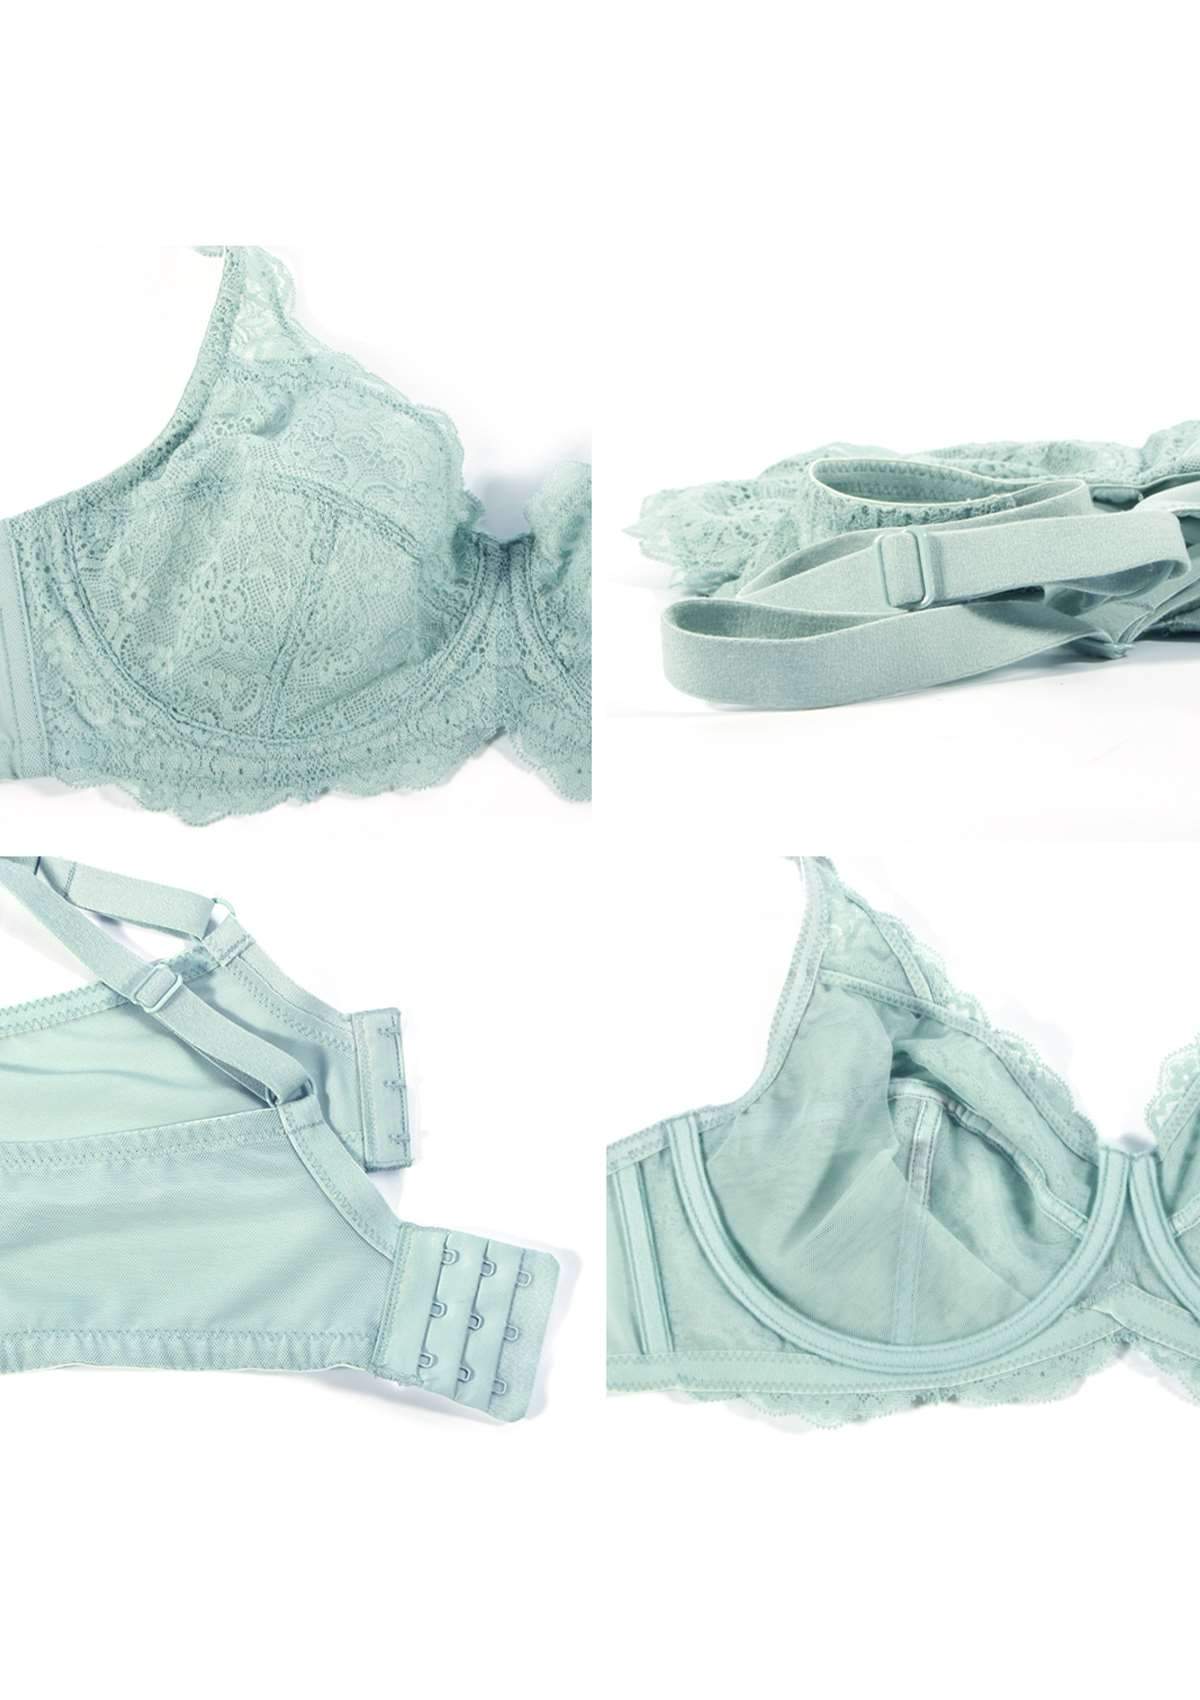 HSIA All-Over Floral Lace: Best Bra For Elderly With Sagging Breasts - Pewter Blue / 36 / C